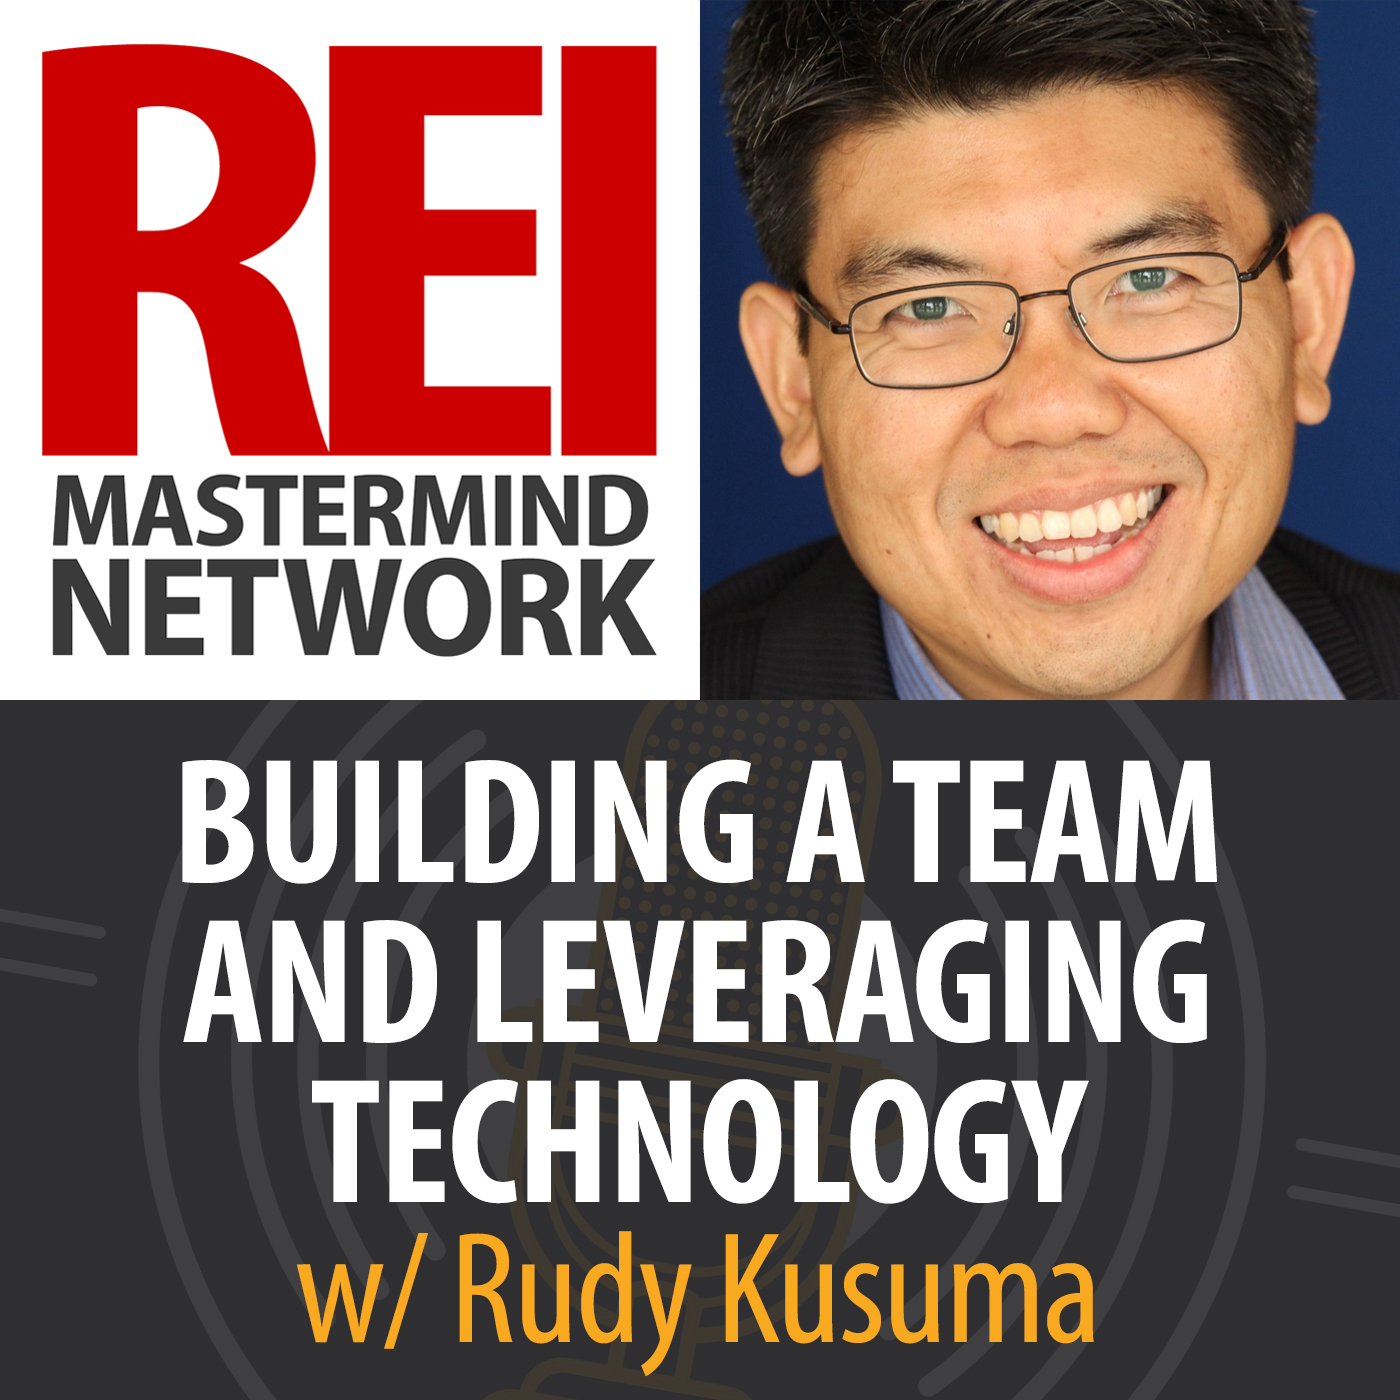 Building a Team and Leveraging Technology with Rudy Kusuma Image